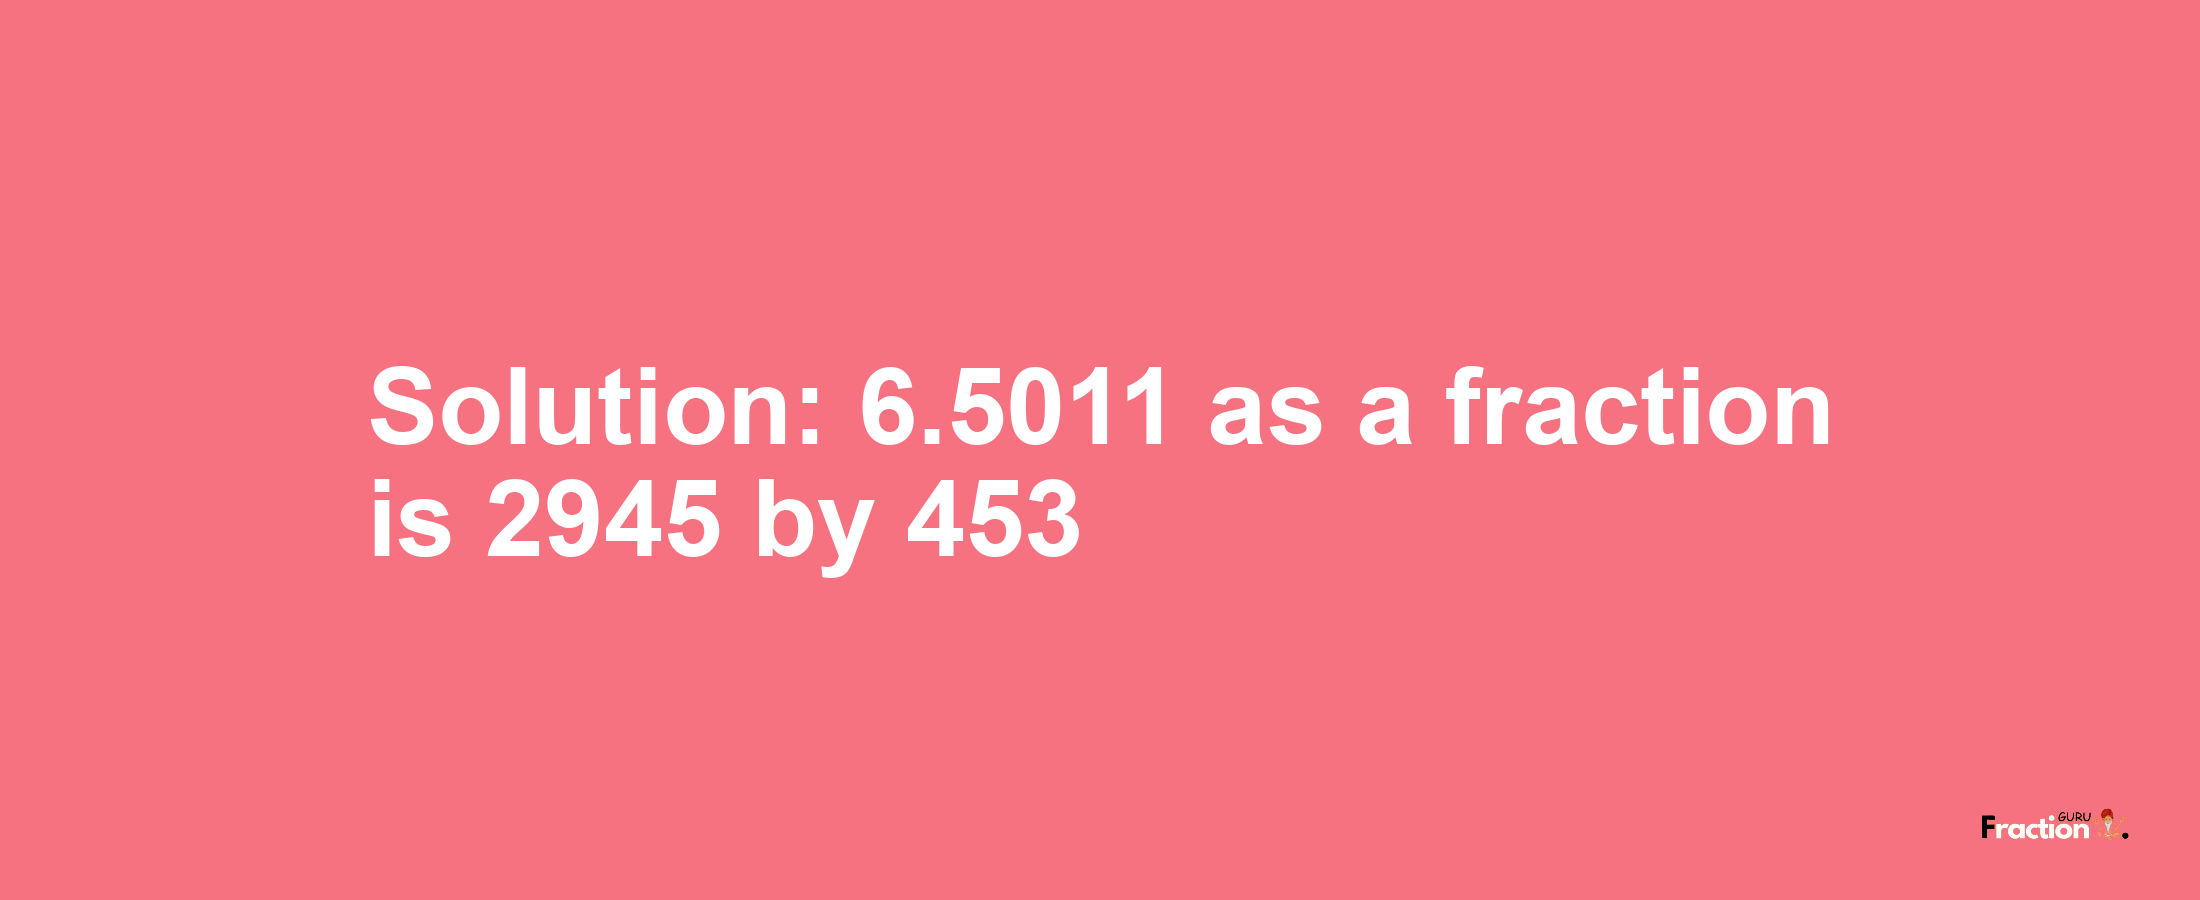 Solution:6.5011 as a fraction is 2945/453